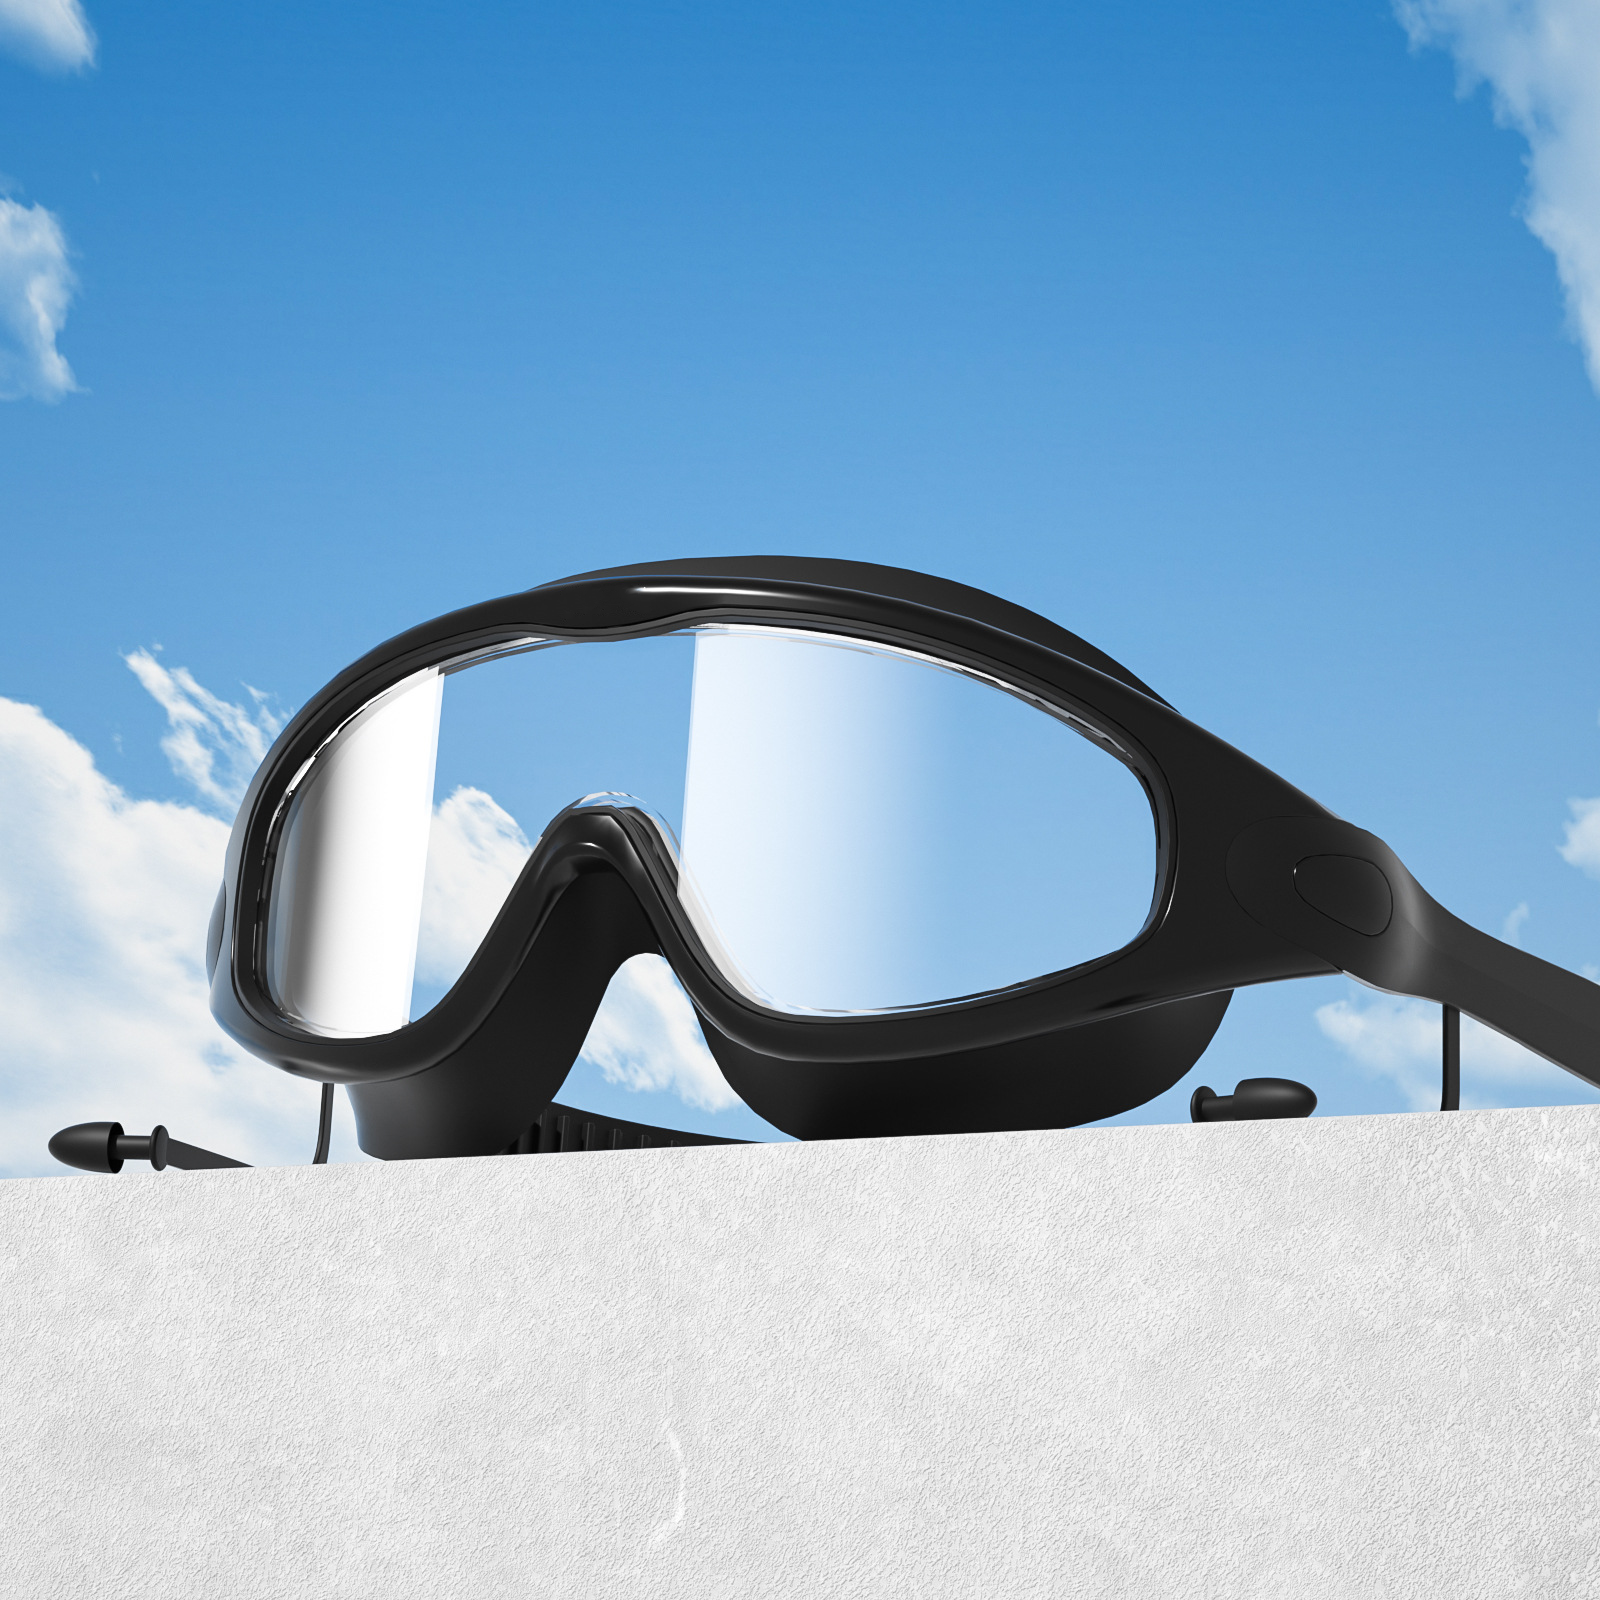 Challenges and Solutions in Swimming Goggles